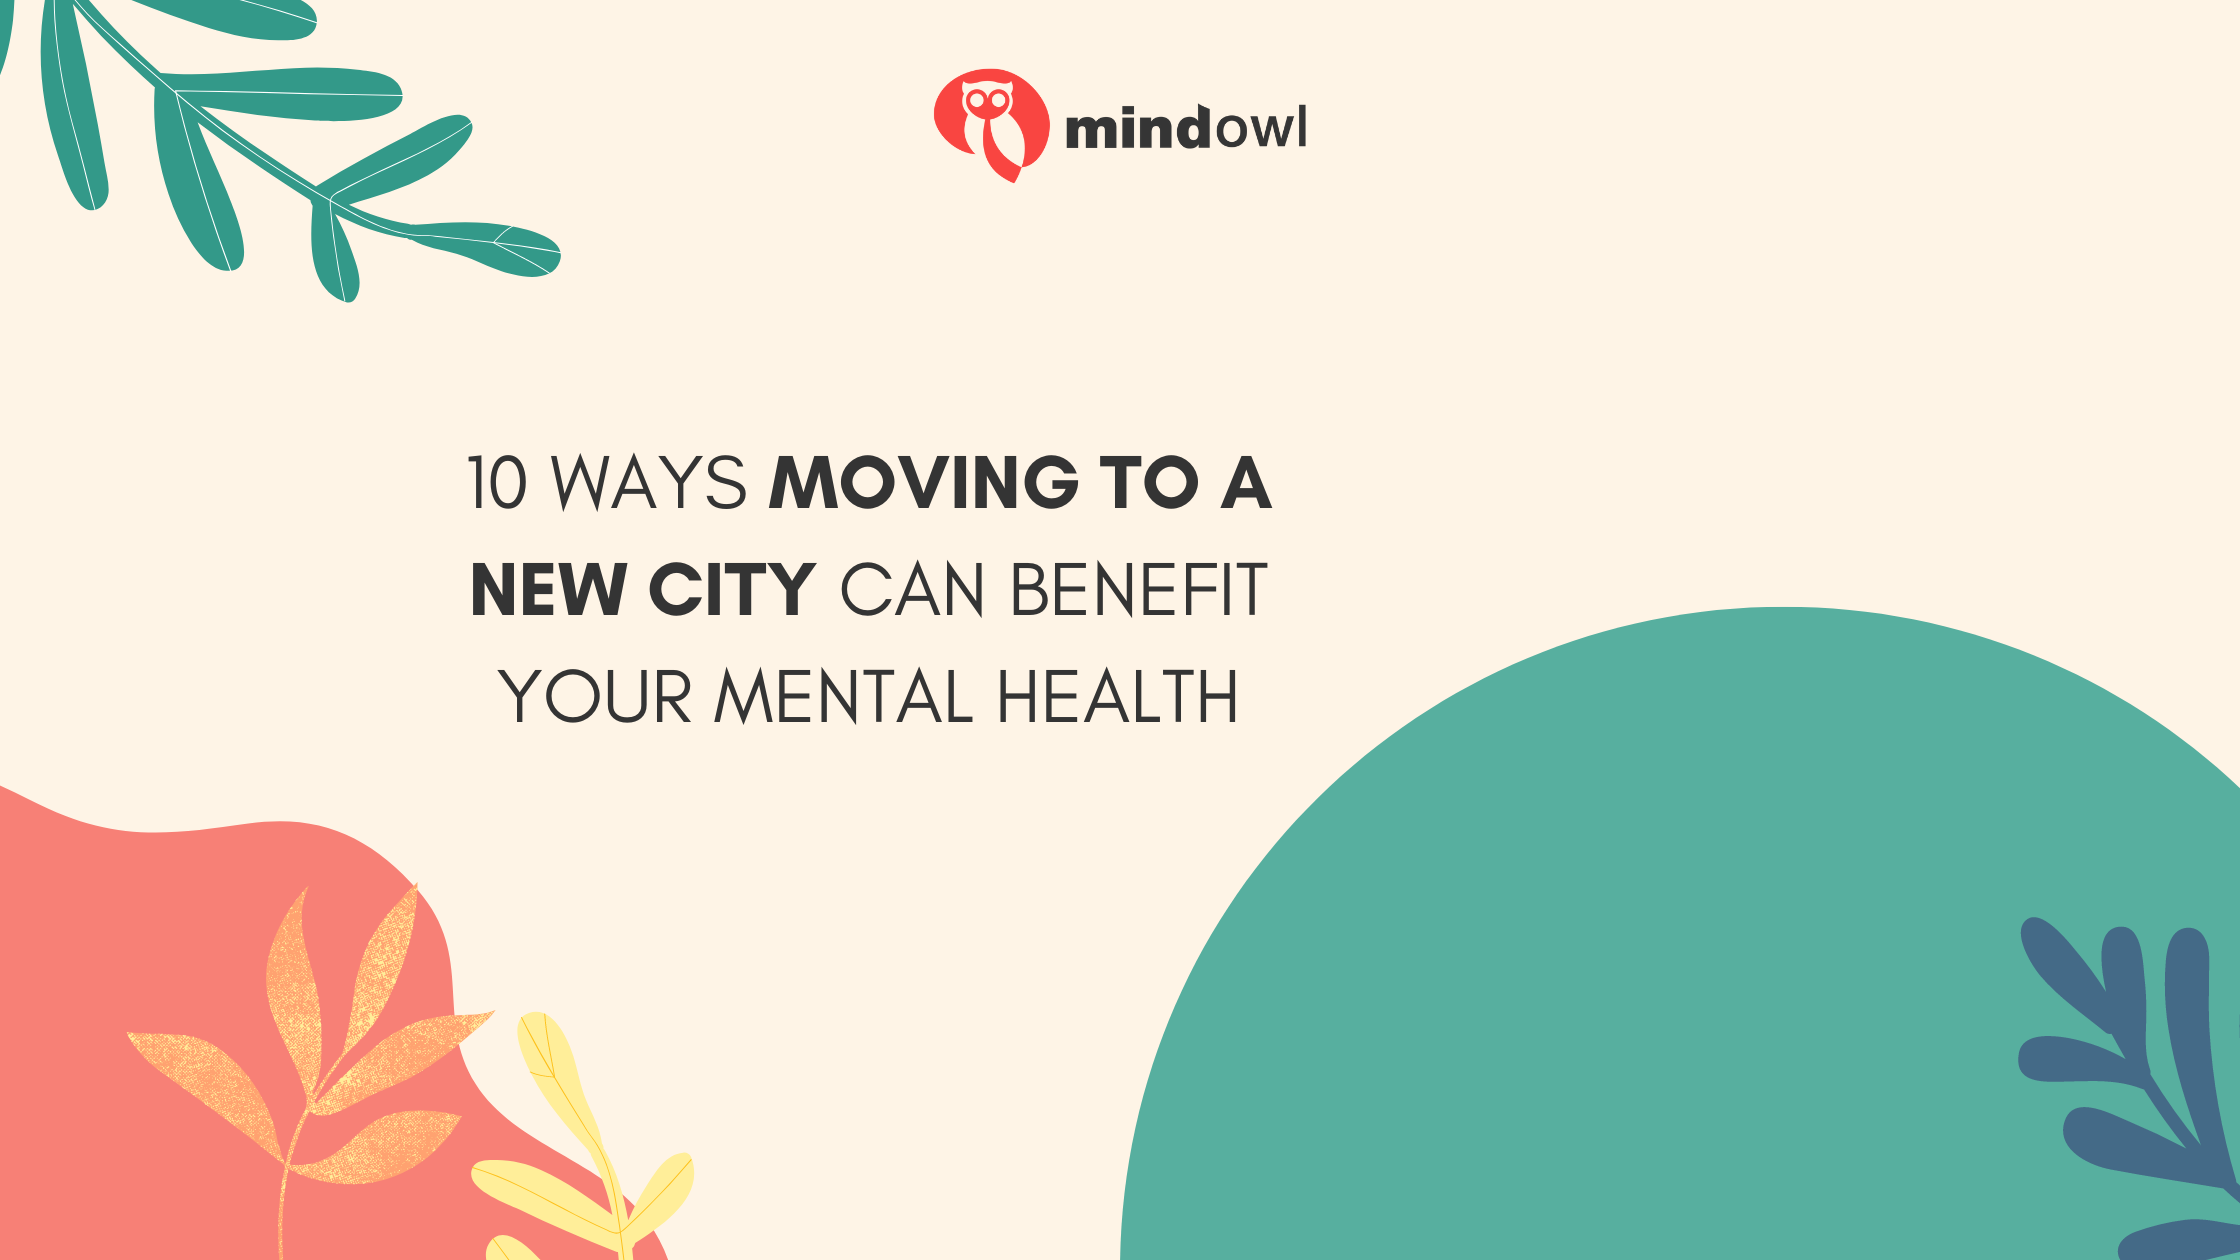 10 Ways Moving To a New City Can Benefit Your Mental Health